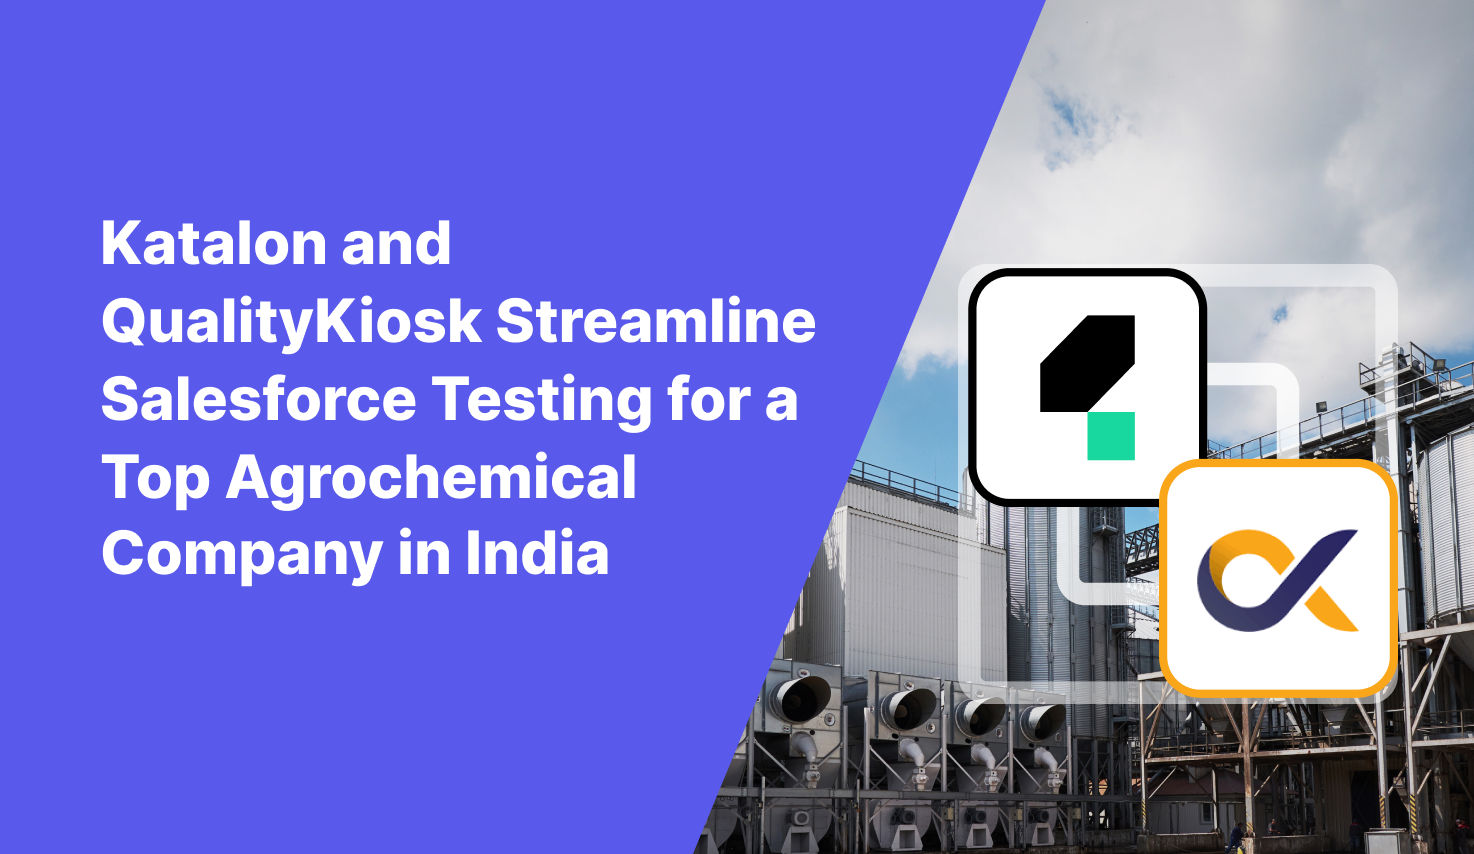 Katalon and QualityKiosk Streamline Salesforce Testing for a Top Agrochemical Company in India